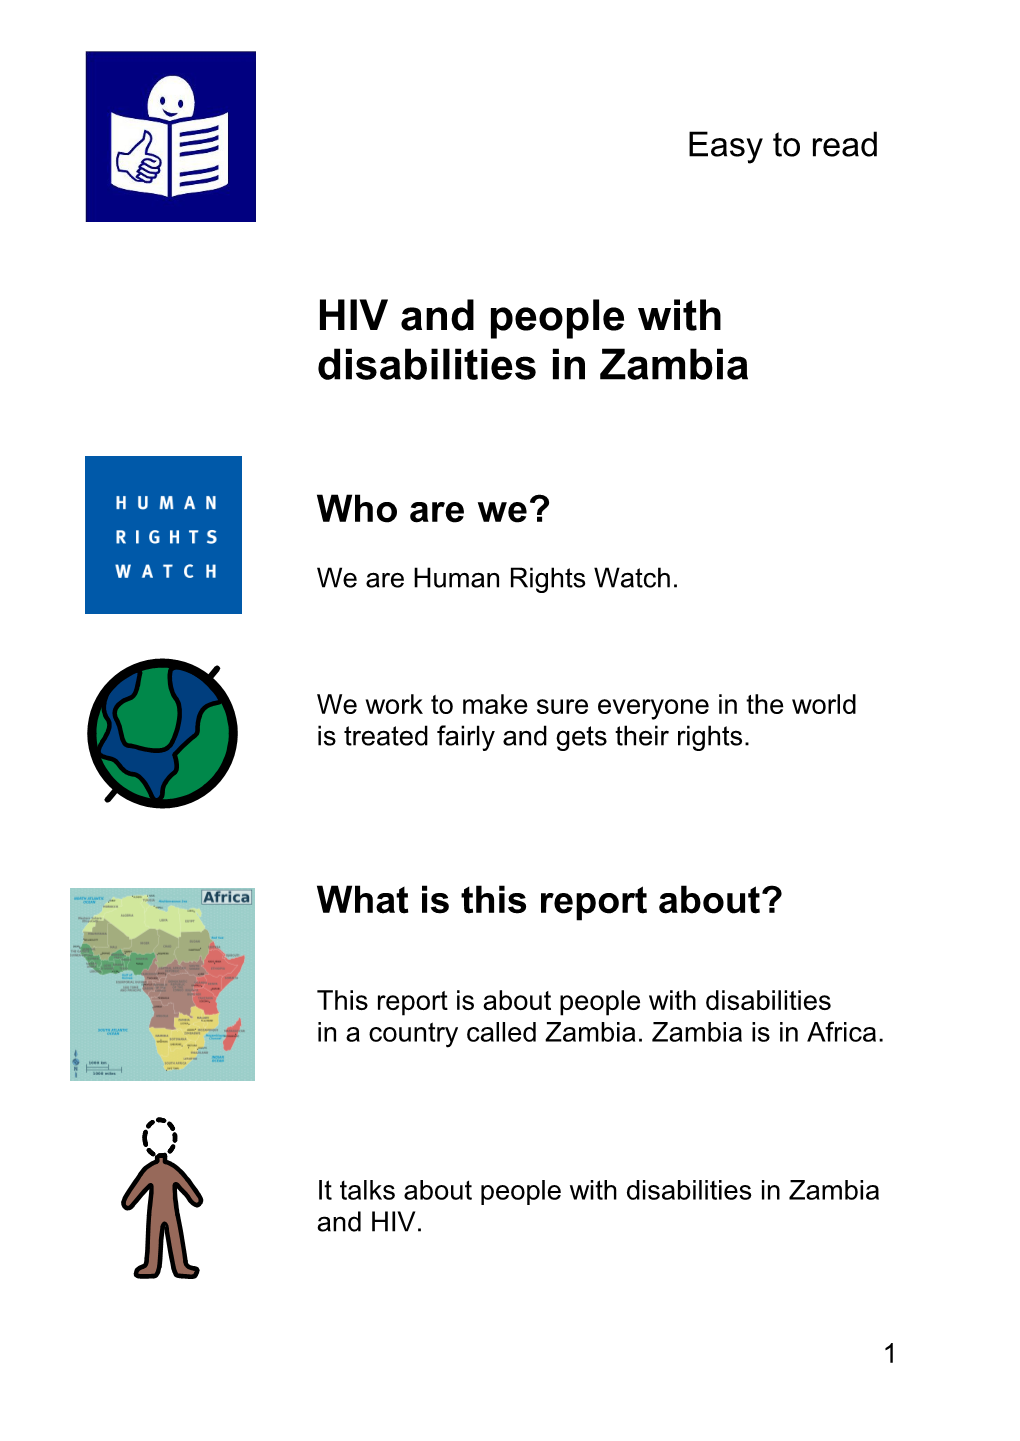 HIV and People with Disabilities in Zambia